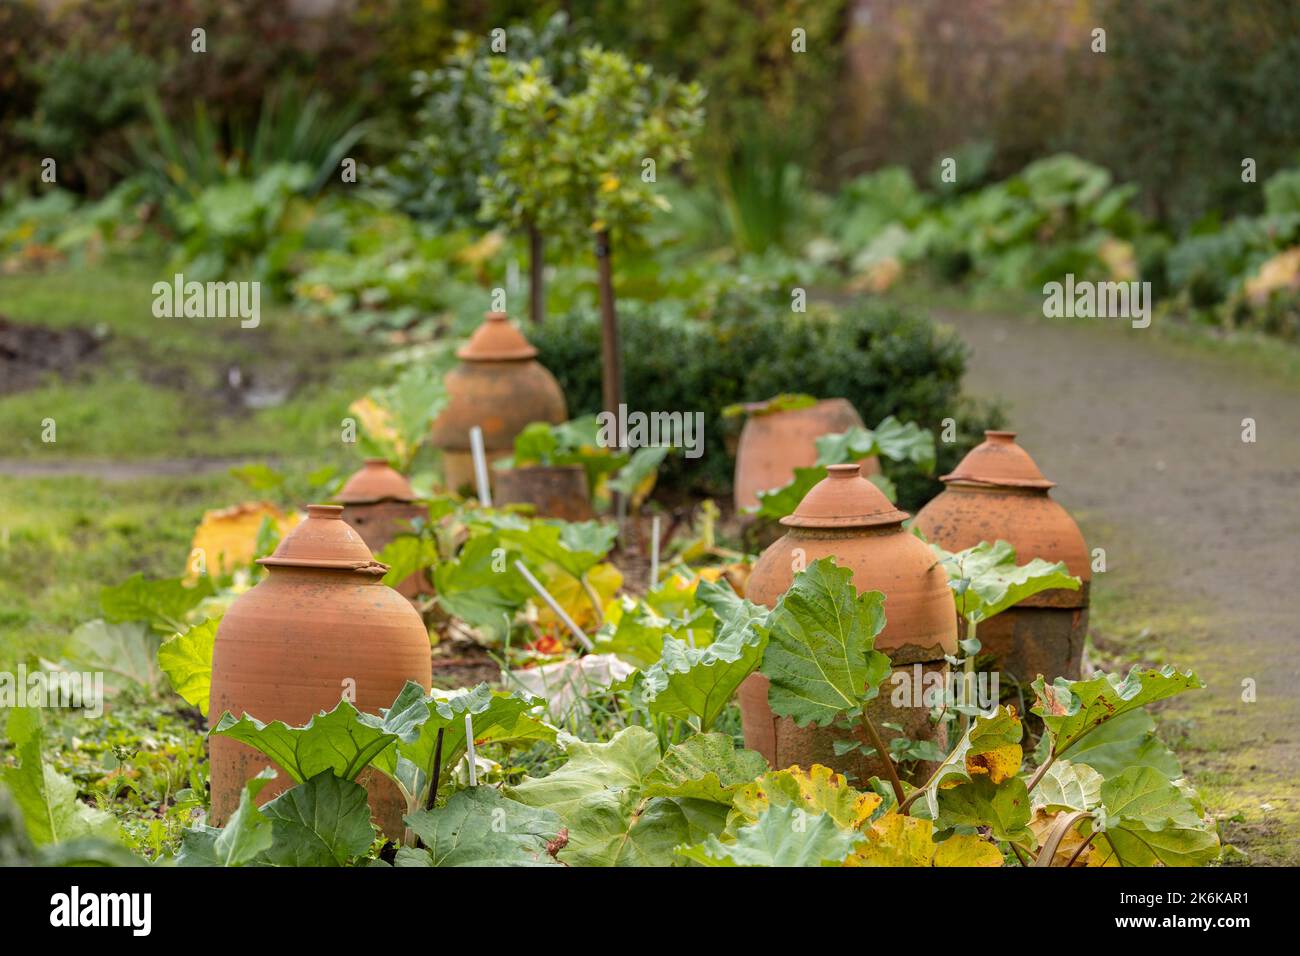 Traditional terracotta forcing jars in rhubarb vegetable garden Stock Photo